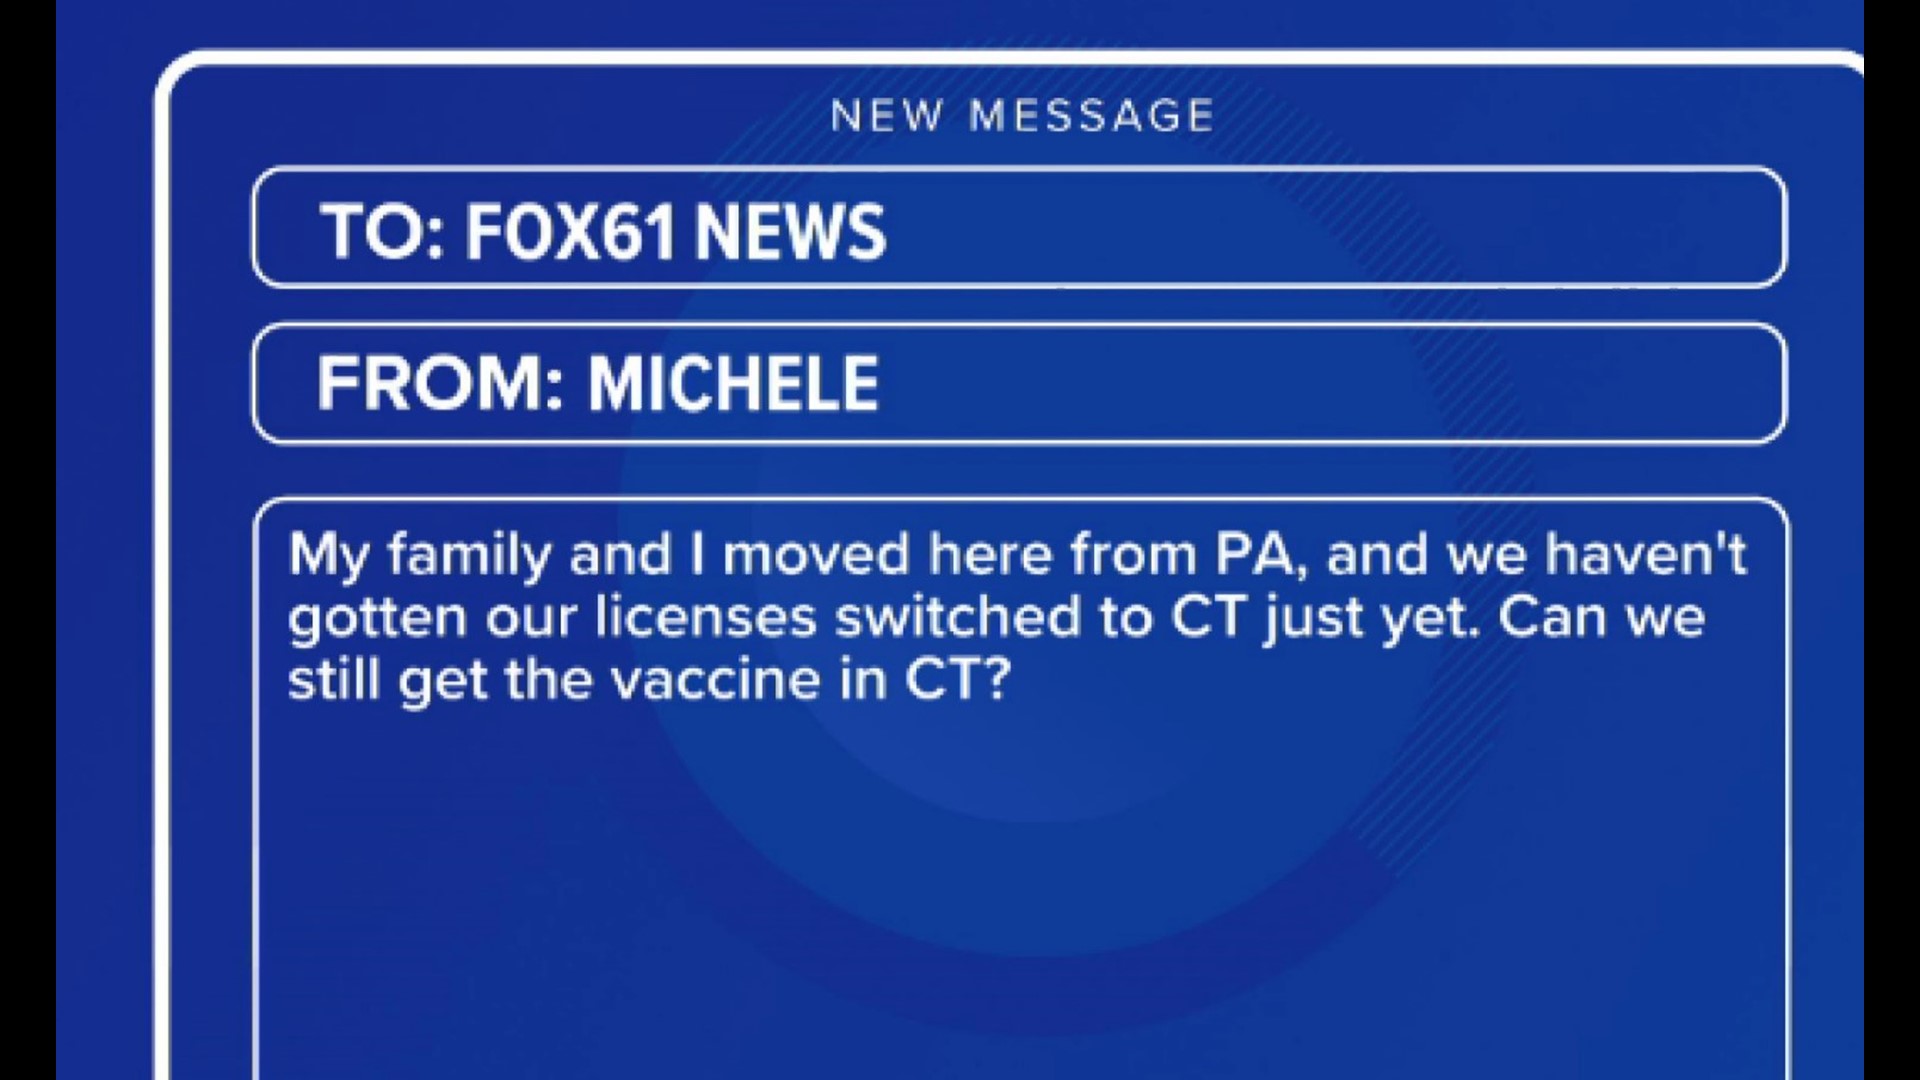 “My family and I moved here from PA, and we haven't gotten our licenses switched to CT just yet. Can we still get the vaccine in CT?"